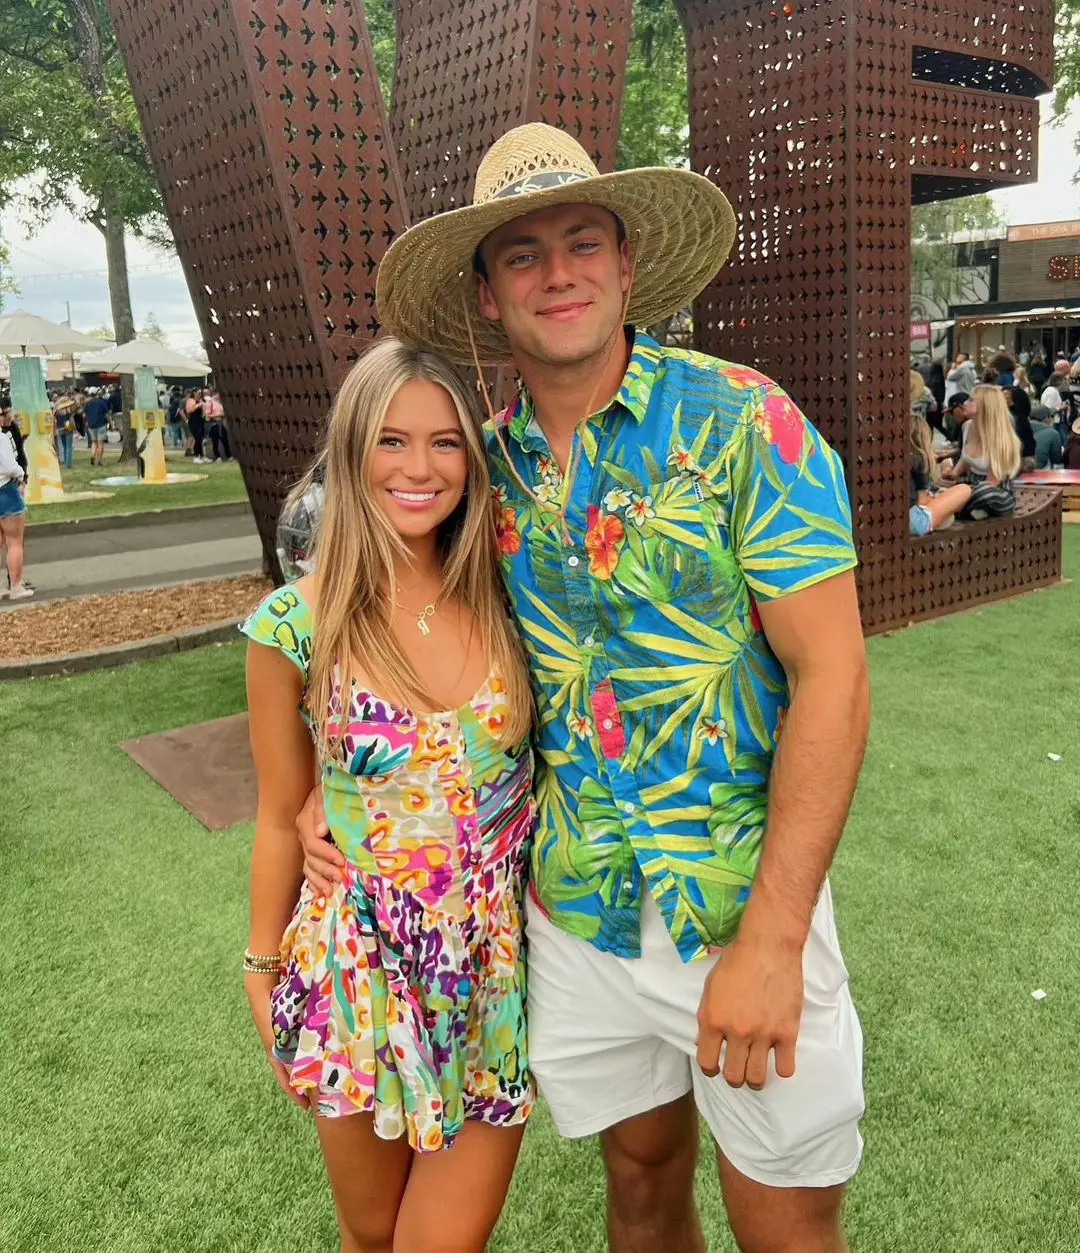 Bulldogs tight end Bowers and his girlfriend Cameron Rose wear fancy outfit at Napa, California in June 2022